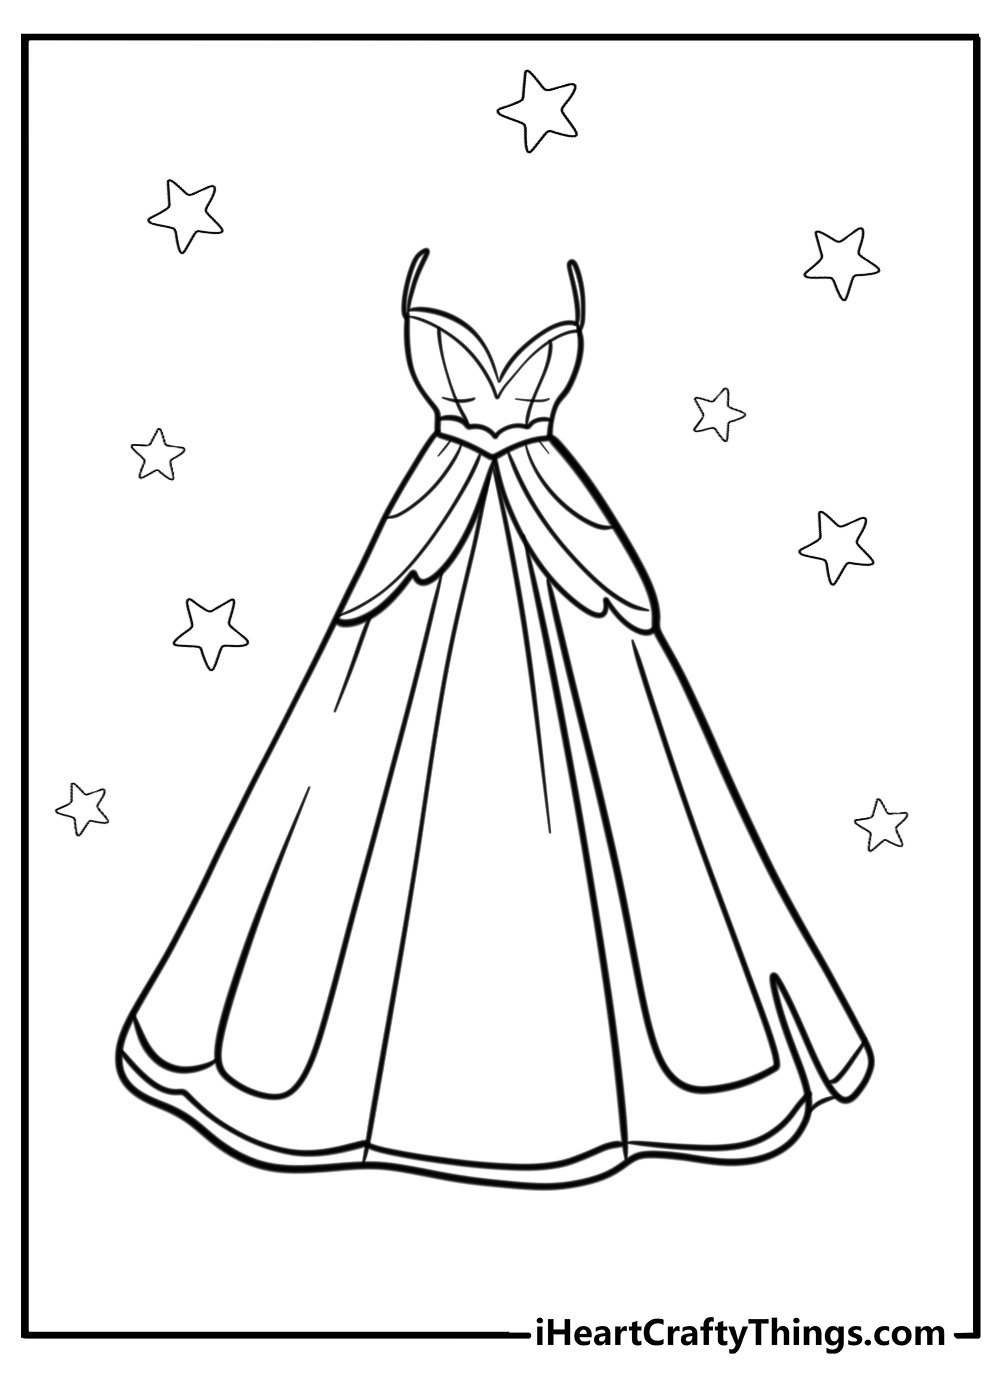 Full length dress coloring page with sheer beaded bodice